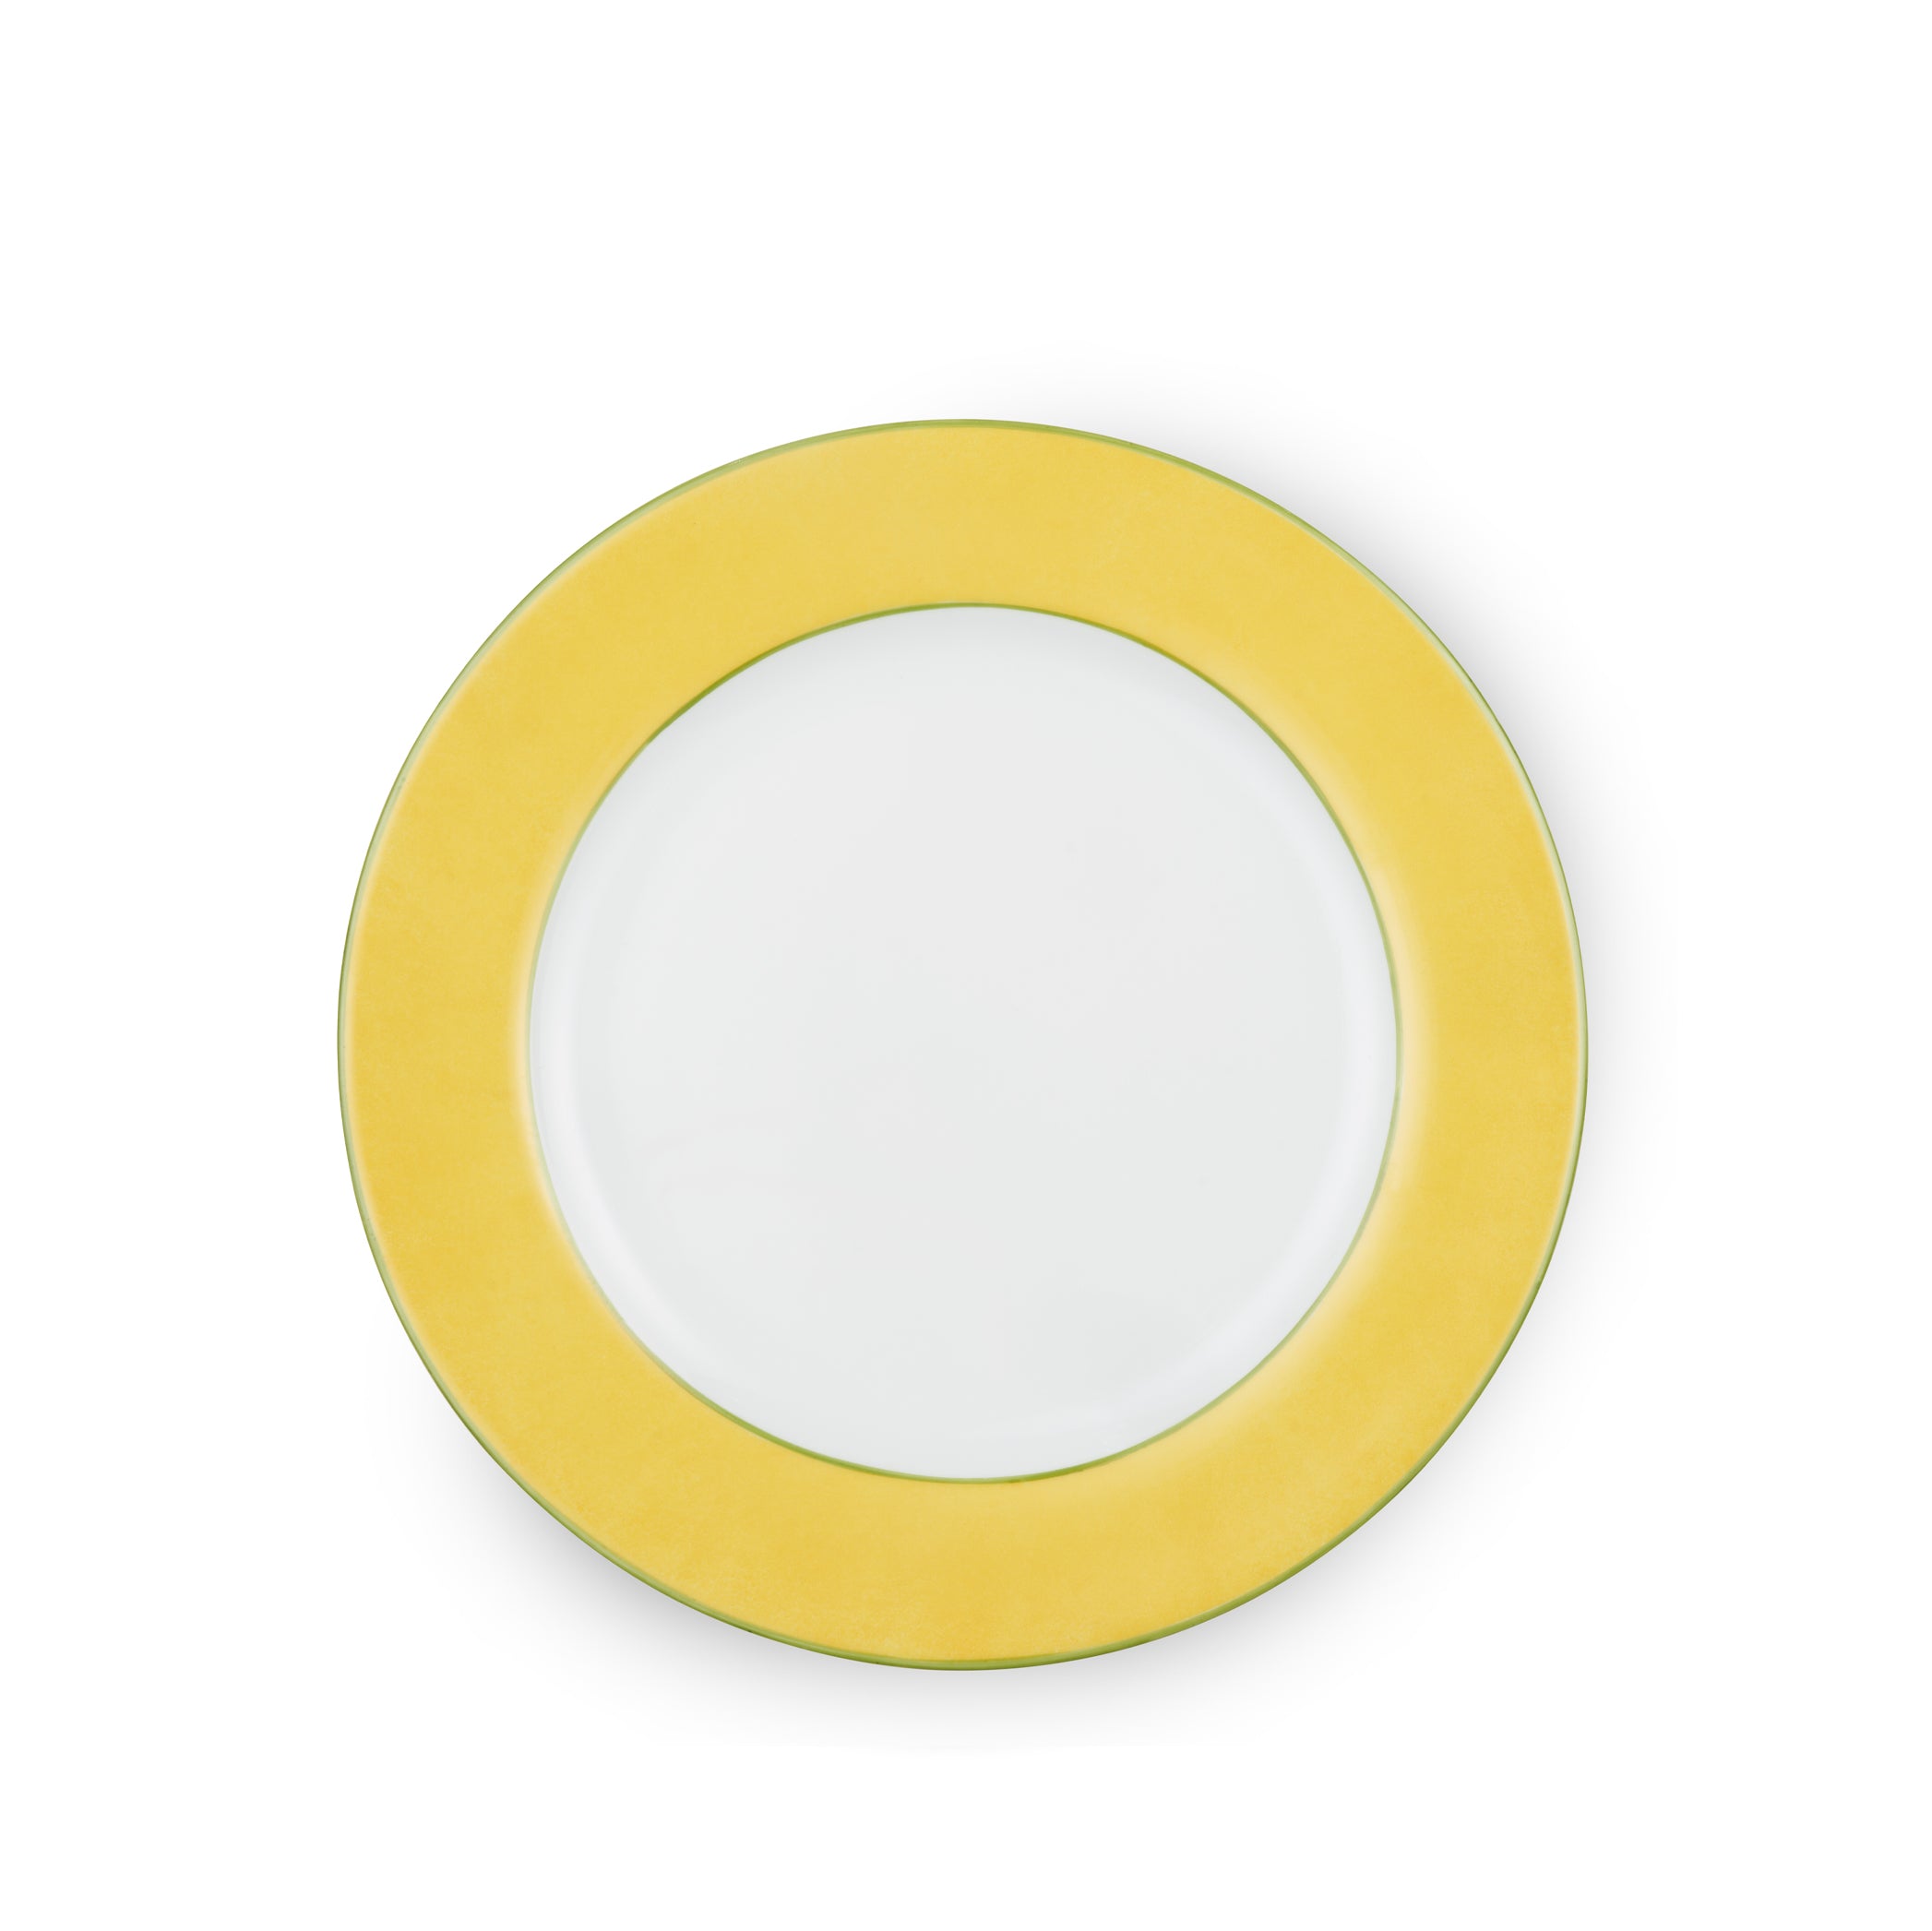 Mimosa Yellow Rim Hand-Painted Porcelain Charger Plate, 30cm